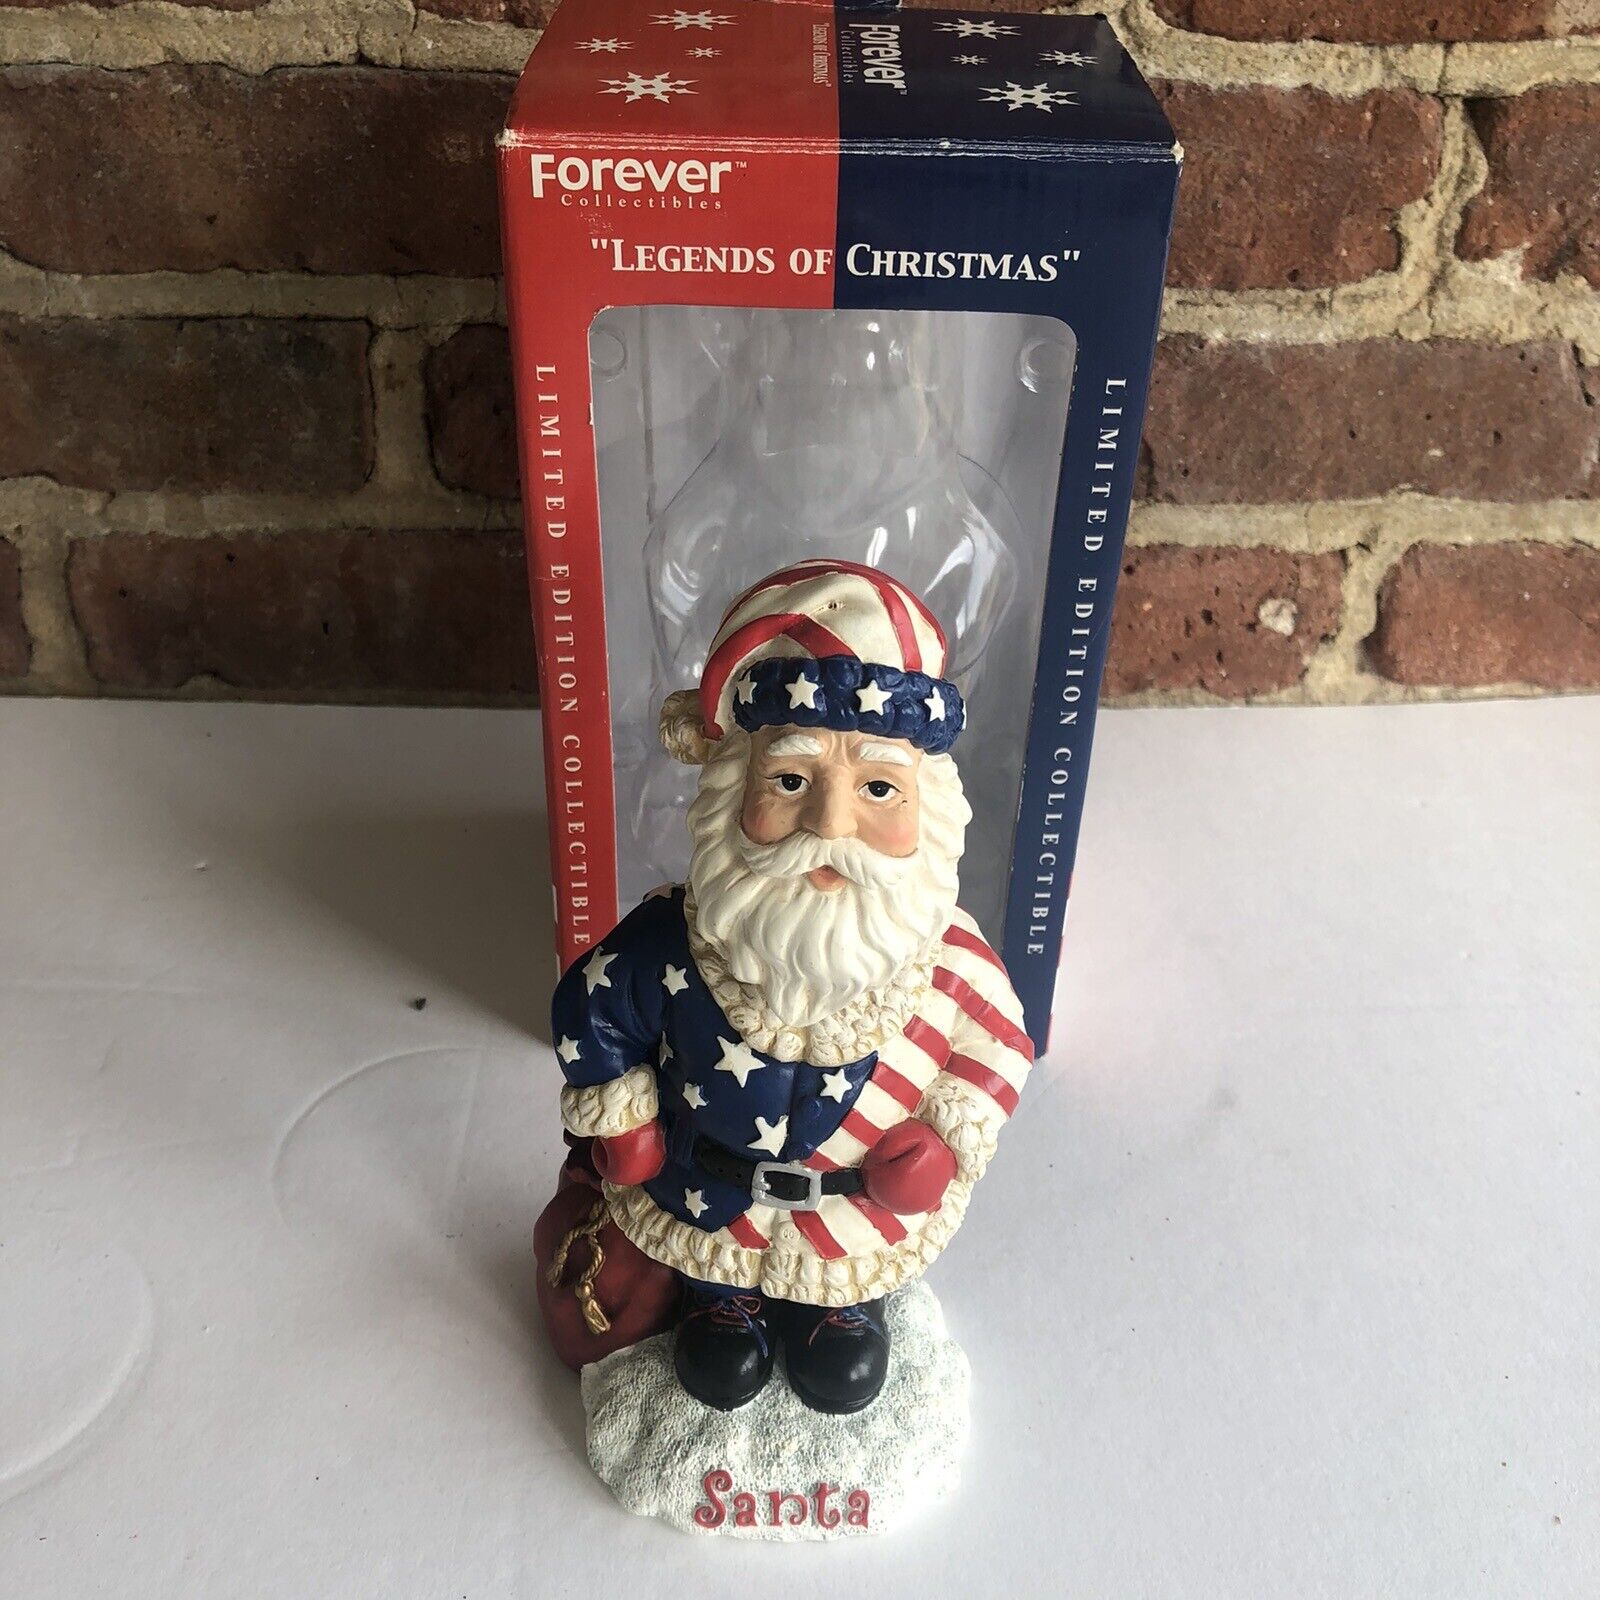 Legends of Christmas Santa Claus Bobblehead Red/White/Blue 2001 Limited Edition